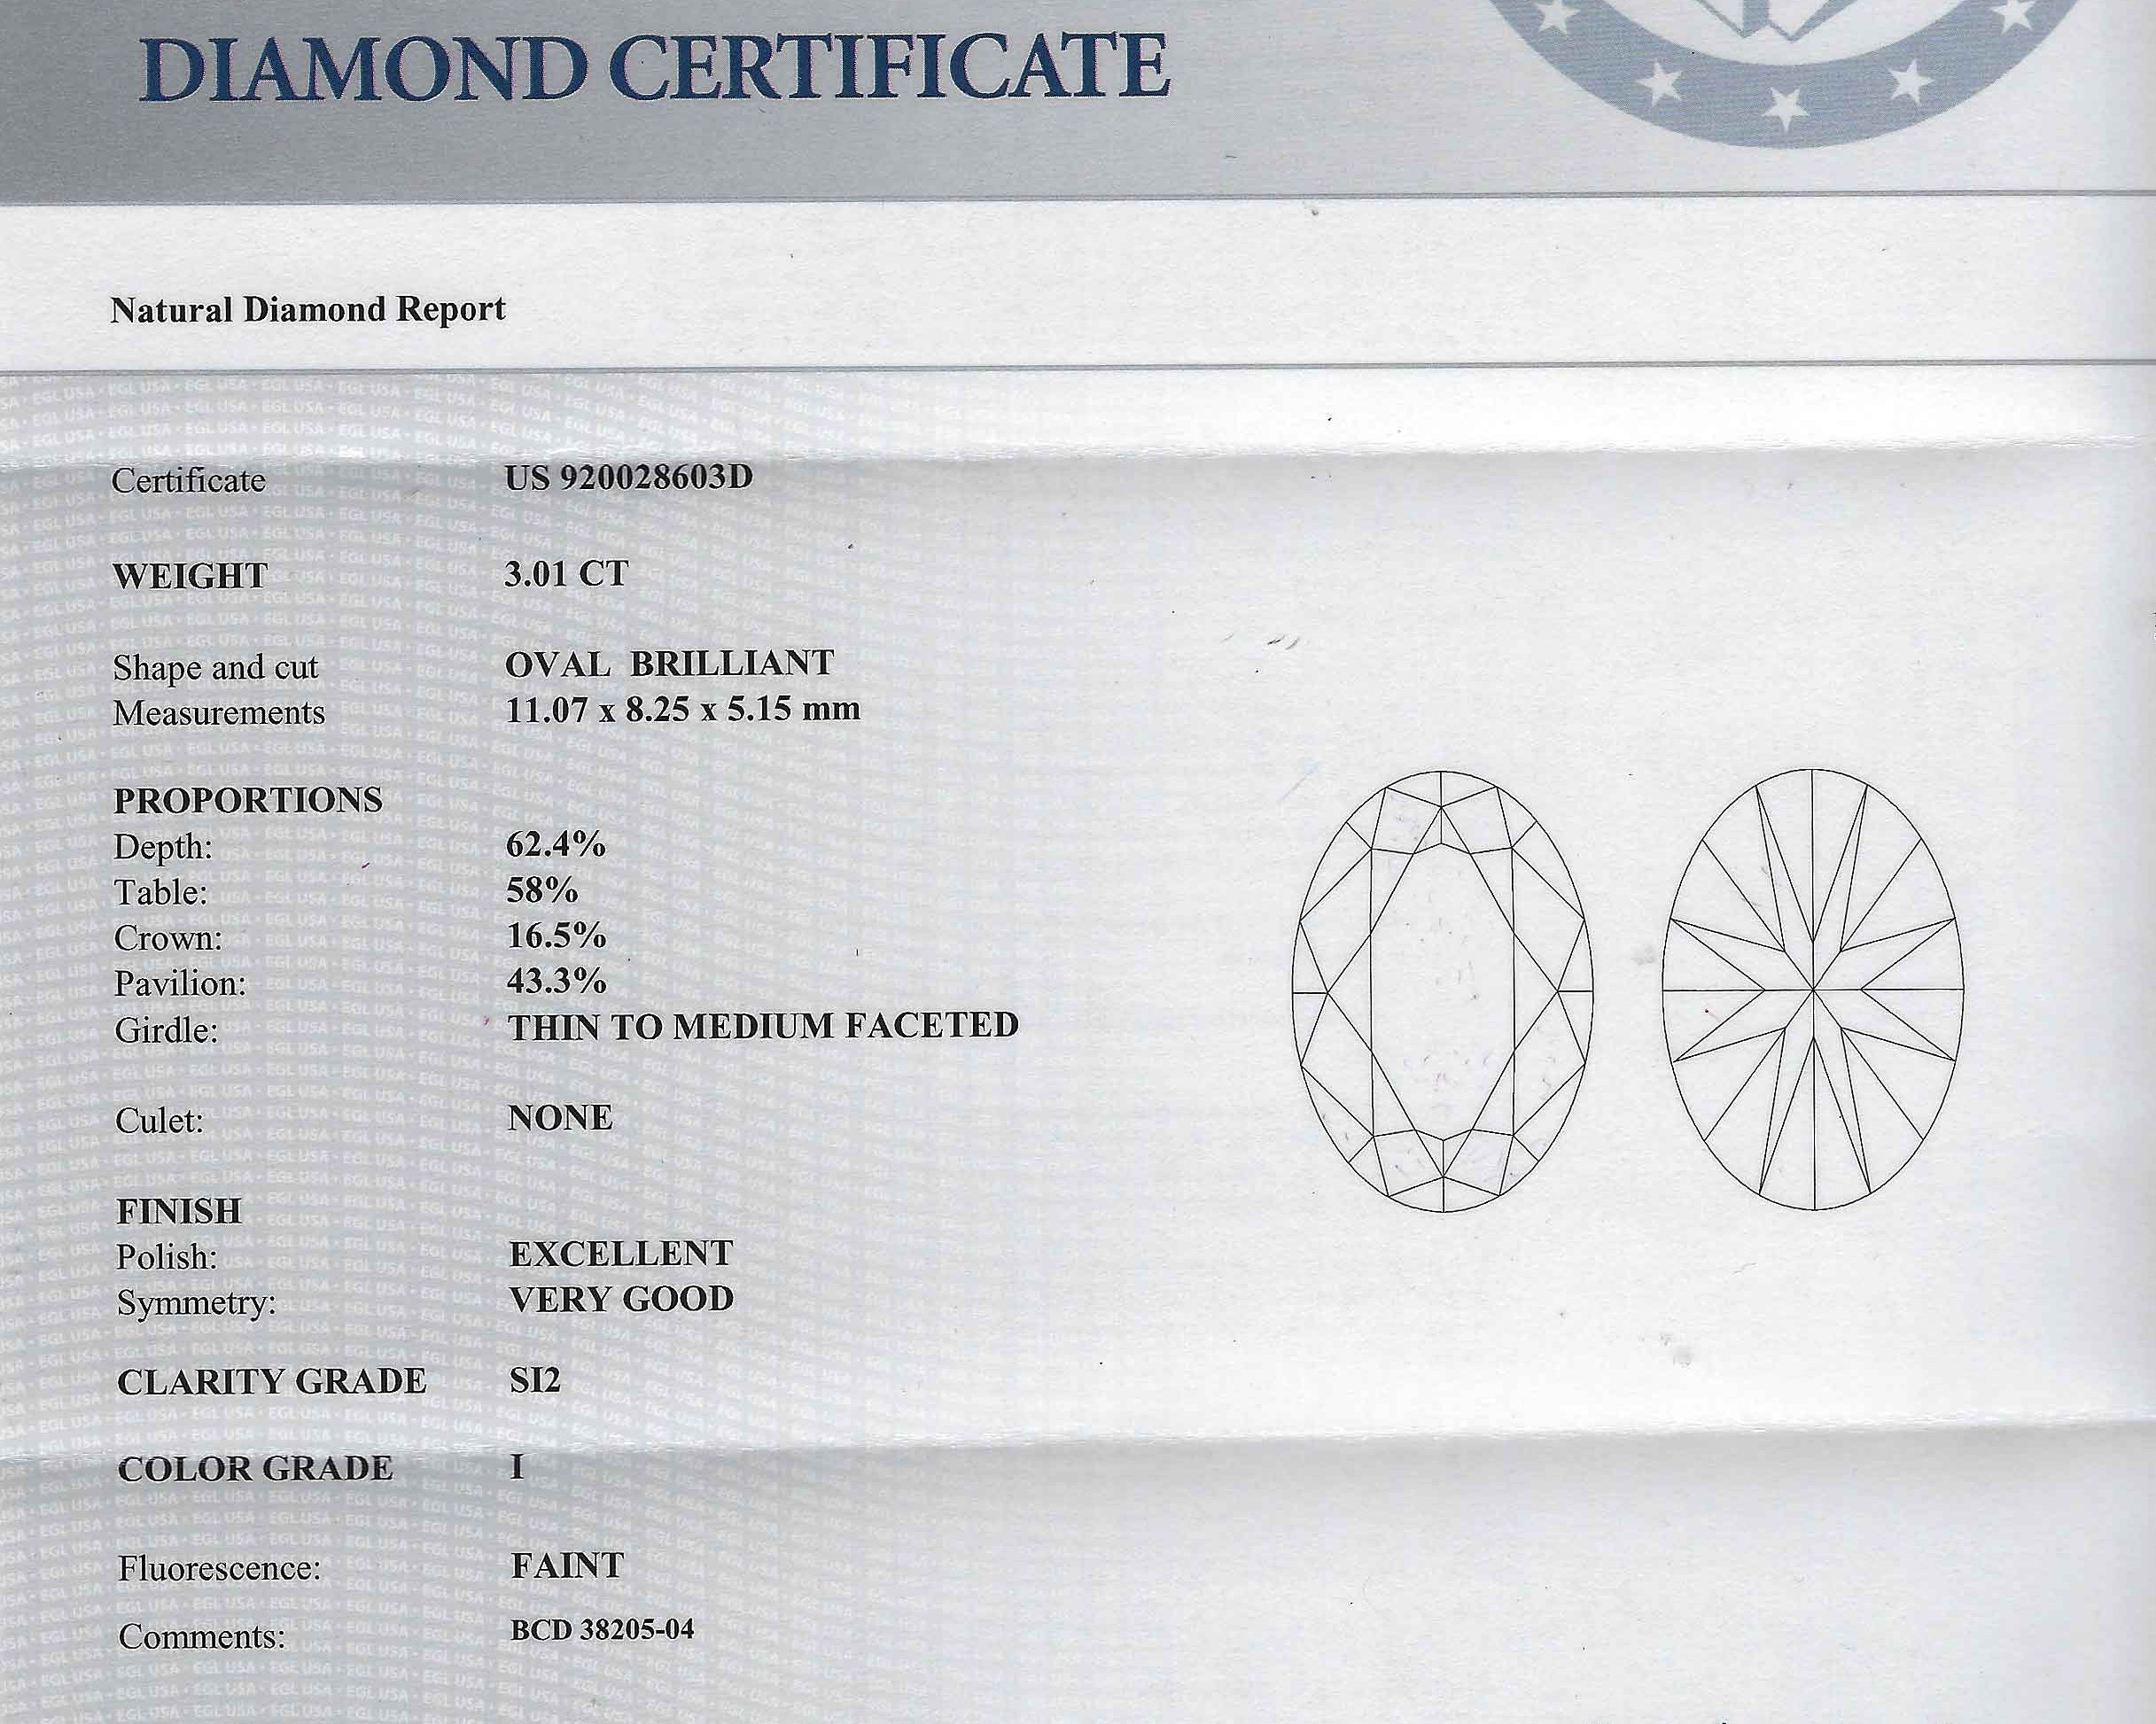 An EGL diamond certificate of the gem measuring just over 3 carats.